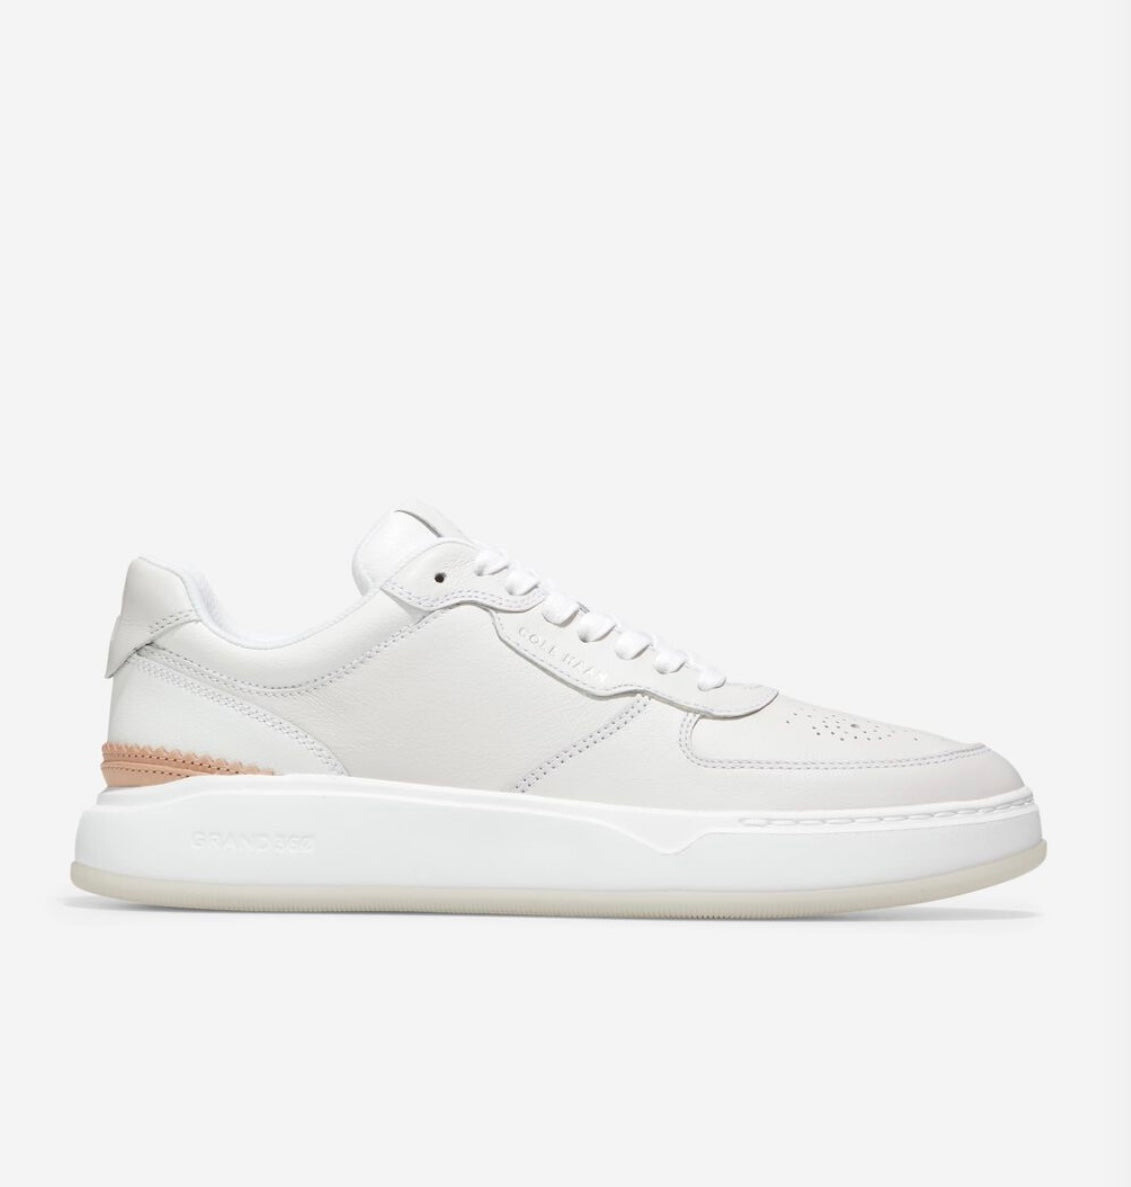 Cole Haan GrandPro Crossover sneakers - Optic White